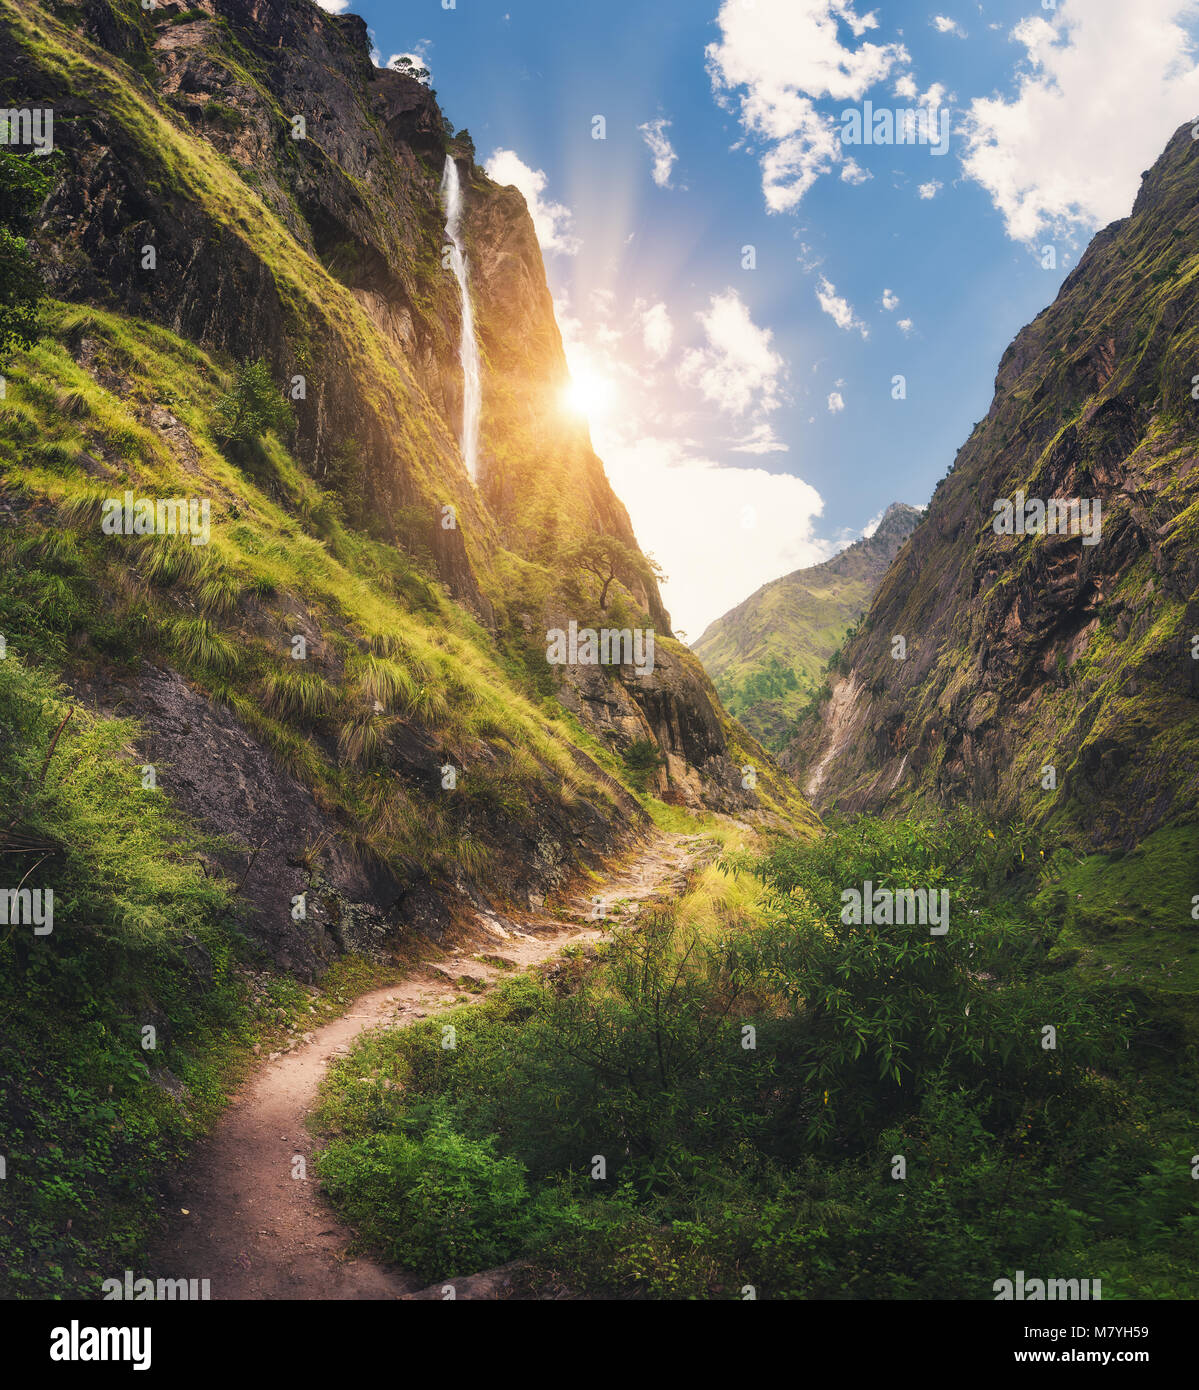 Amazing Himalayan mountains covered green grass, high waterfall, beautiful path, green trees, blue sky with yellow sun and clouds in Nepal at sunset.  Stock Photo